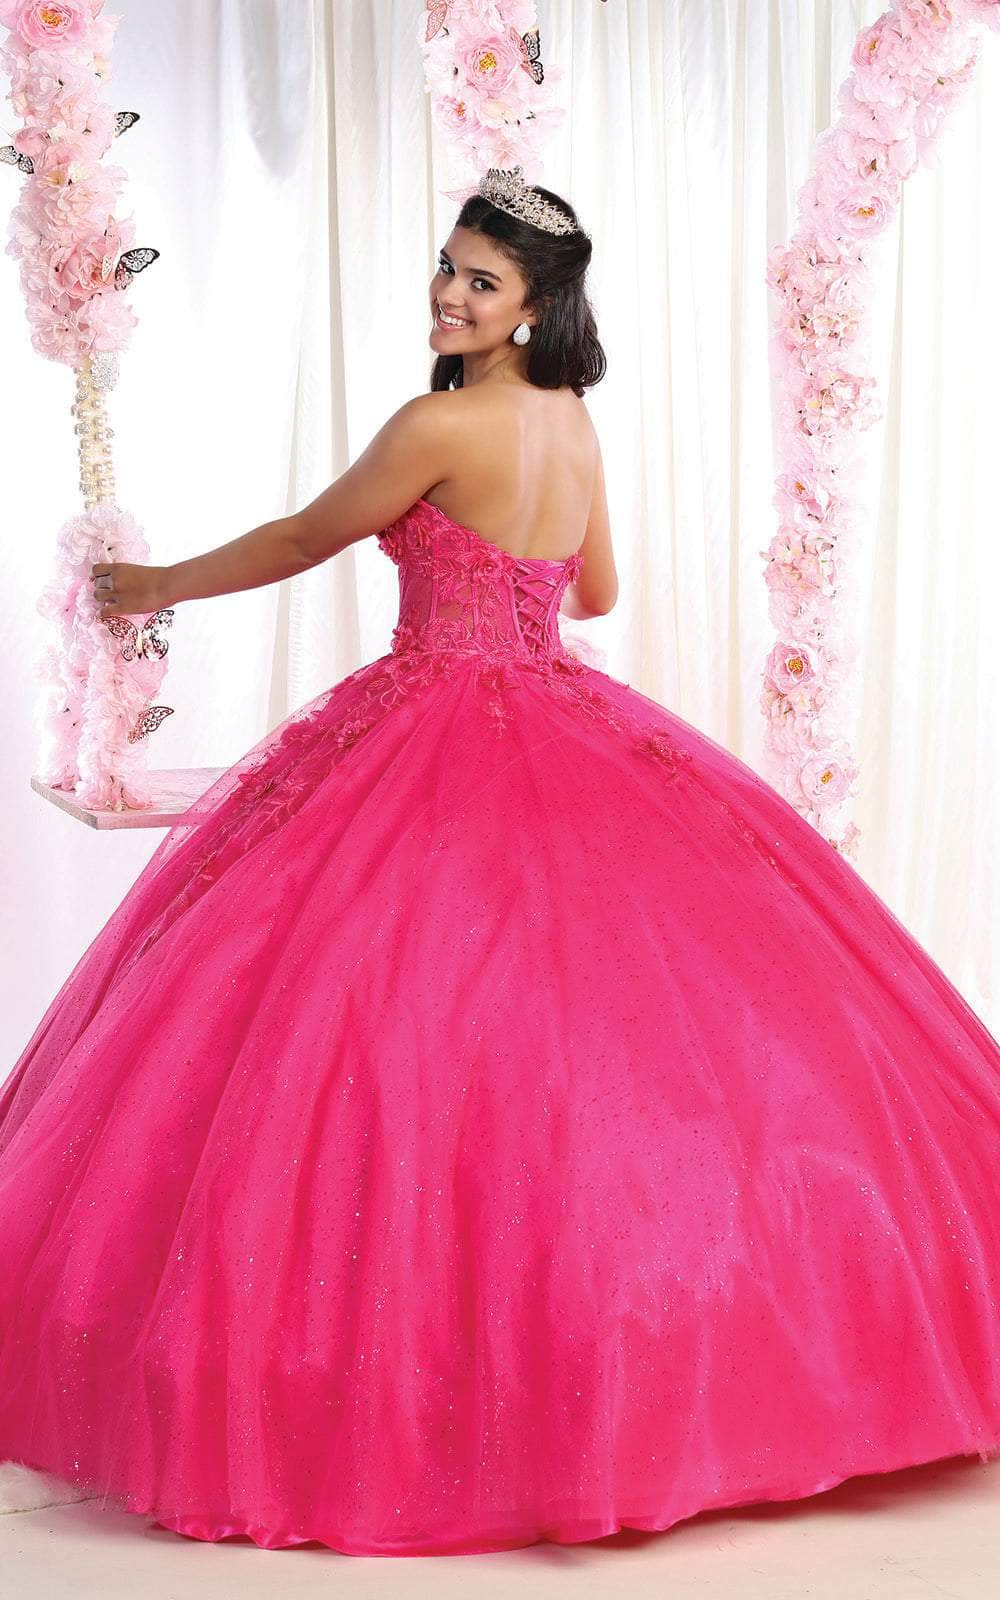 May Queen LK188 - Strapless 3D Floral Embroidered Ballgown Special Occasion Dress